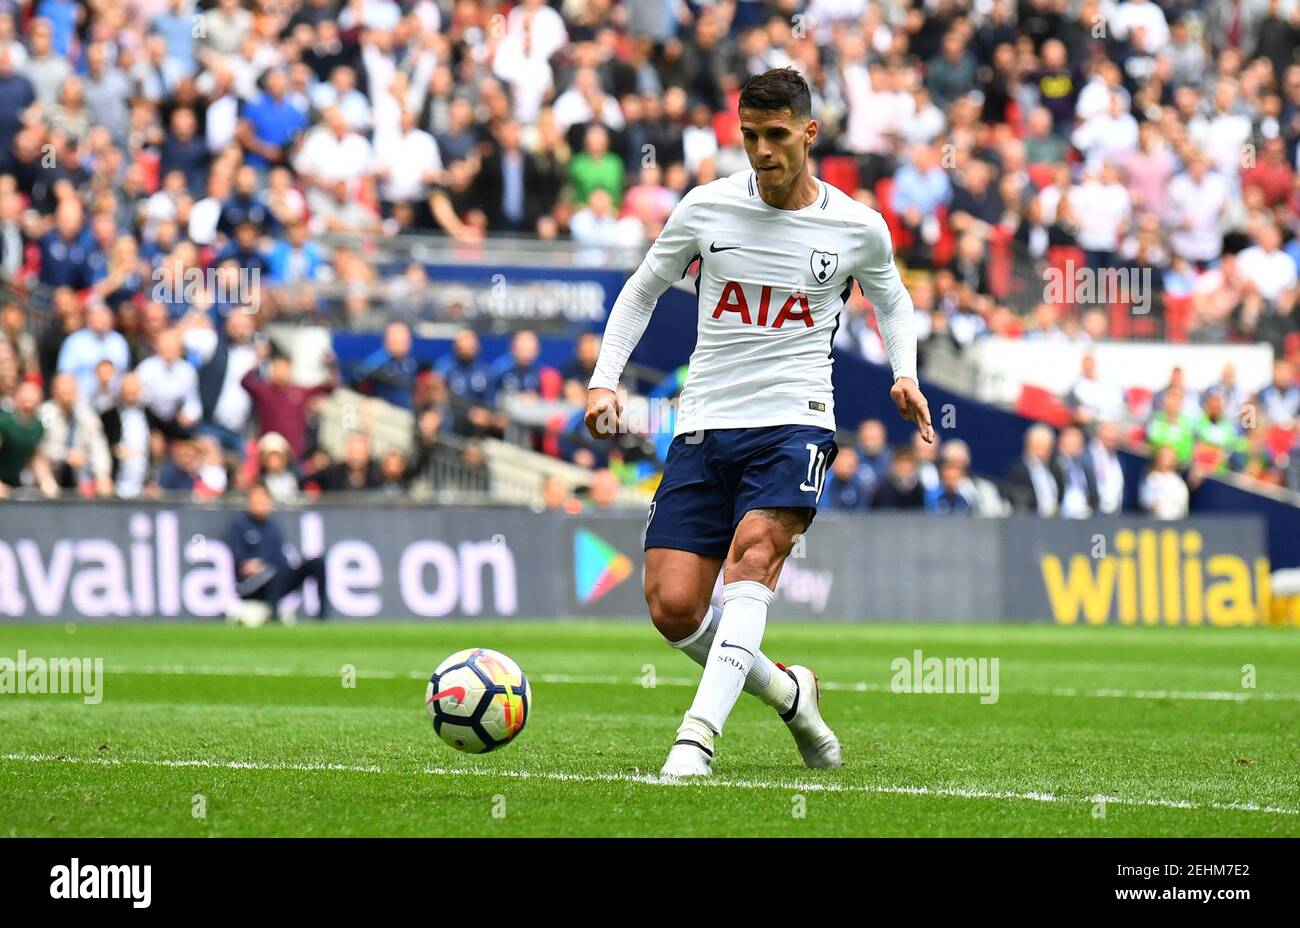 Soccer Football - Premier League - Tottenham Hotspur vs Leicester City - Wembley Stadium, London, Britain - May 13, 2018   Tottenham's Erik Lamela scores their fourth goal    REUTERS/Dylan Martinez    EDITORIAL USE ONLY. No use with unauthorized audio, video, data, fixture lists, club/league logos or 'live' services. Online in-match use limited to 75 images, no video emulation. No use in betting, games or single club/league/player publications.  Please contact your account representative for further details. Stock Photo